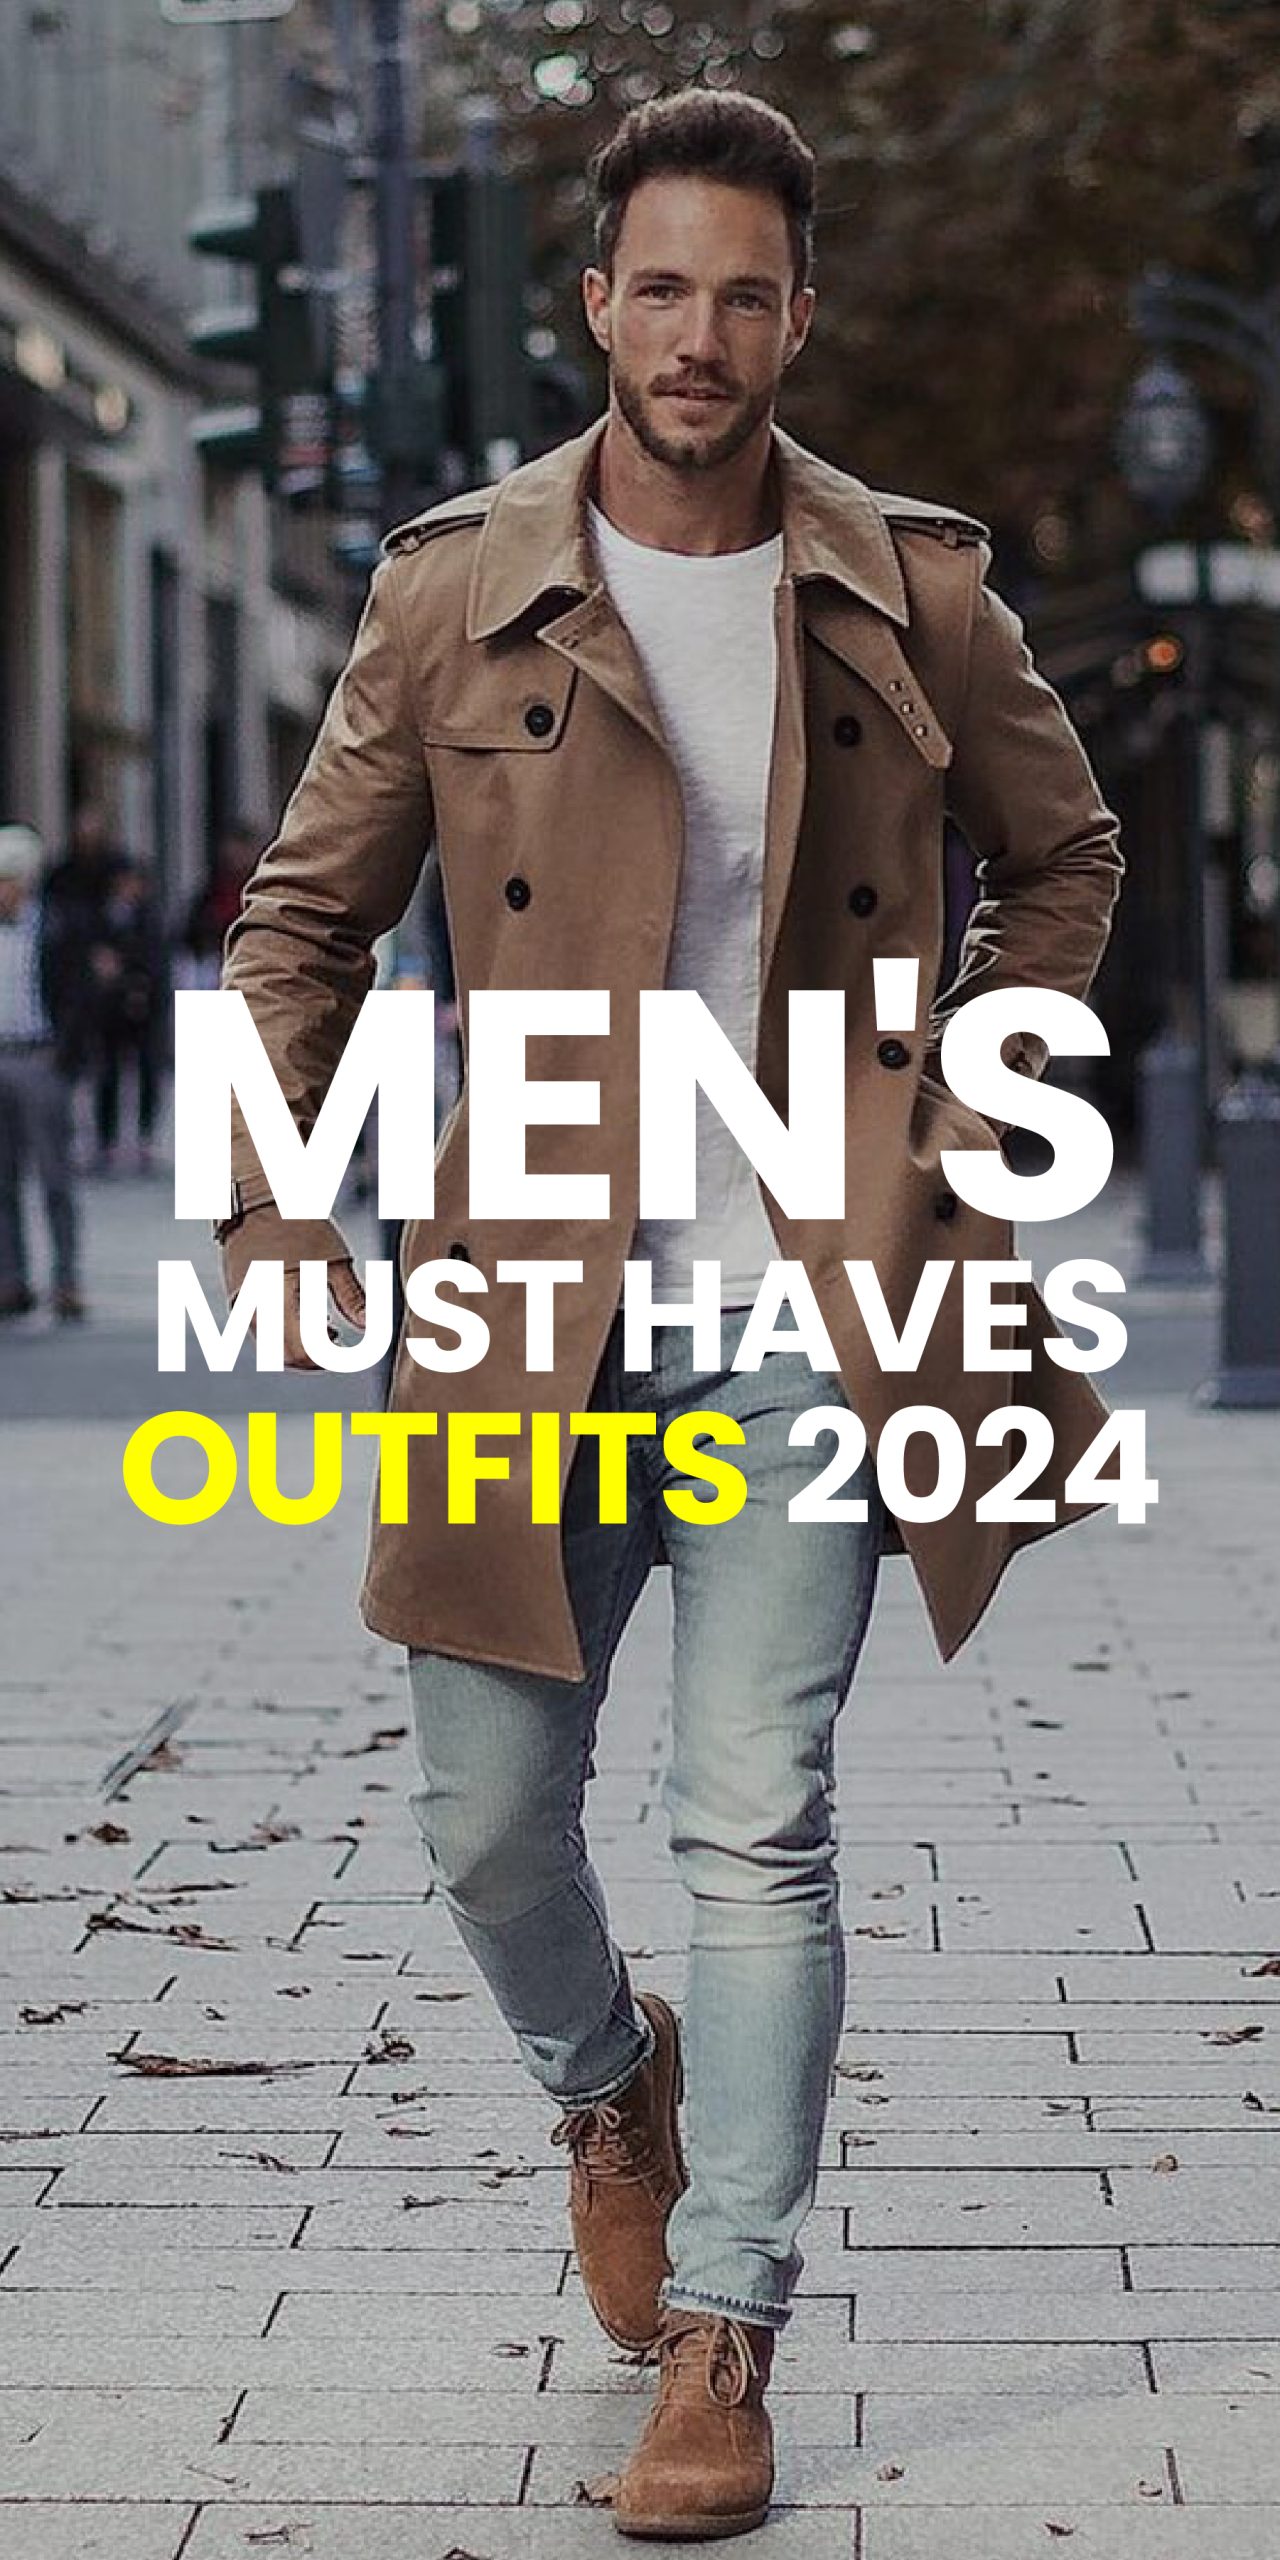 MEN’S MUST HAVES OUTFITS 2024